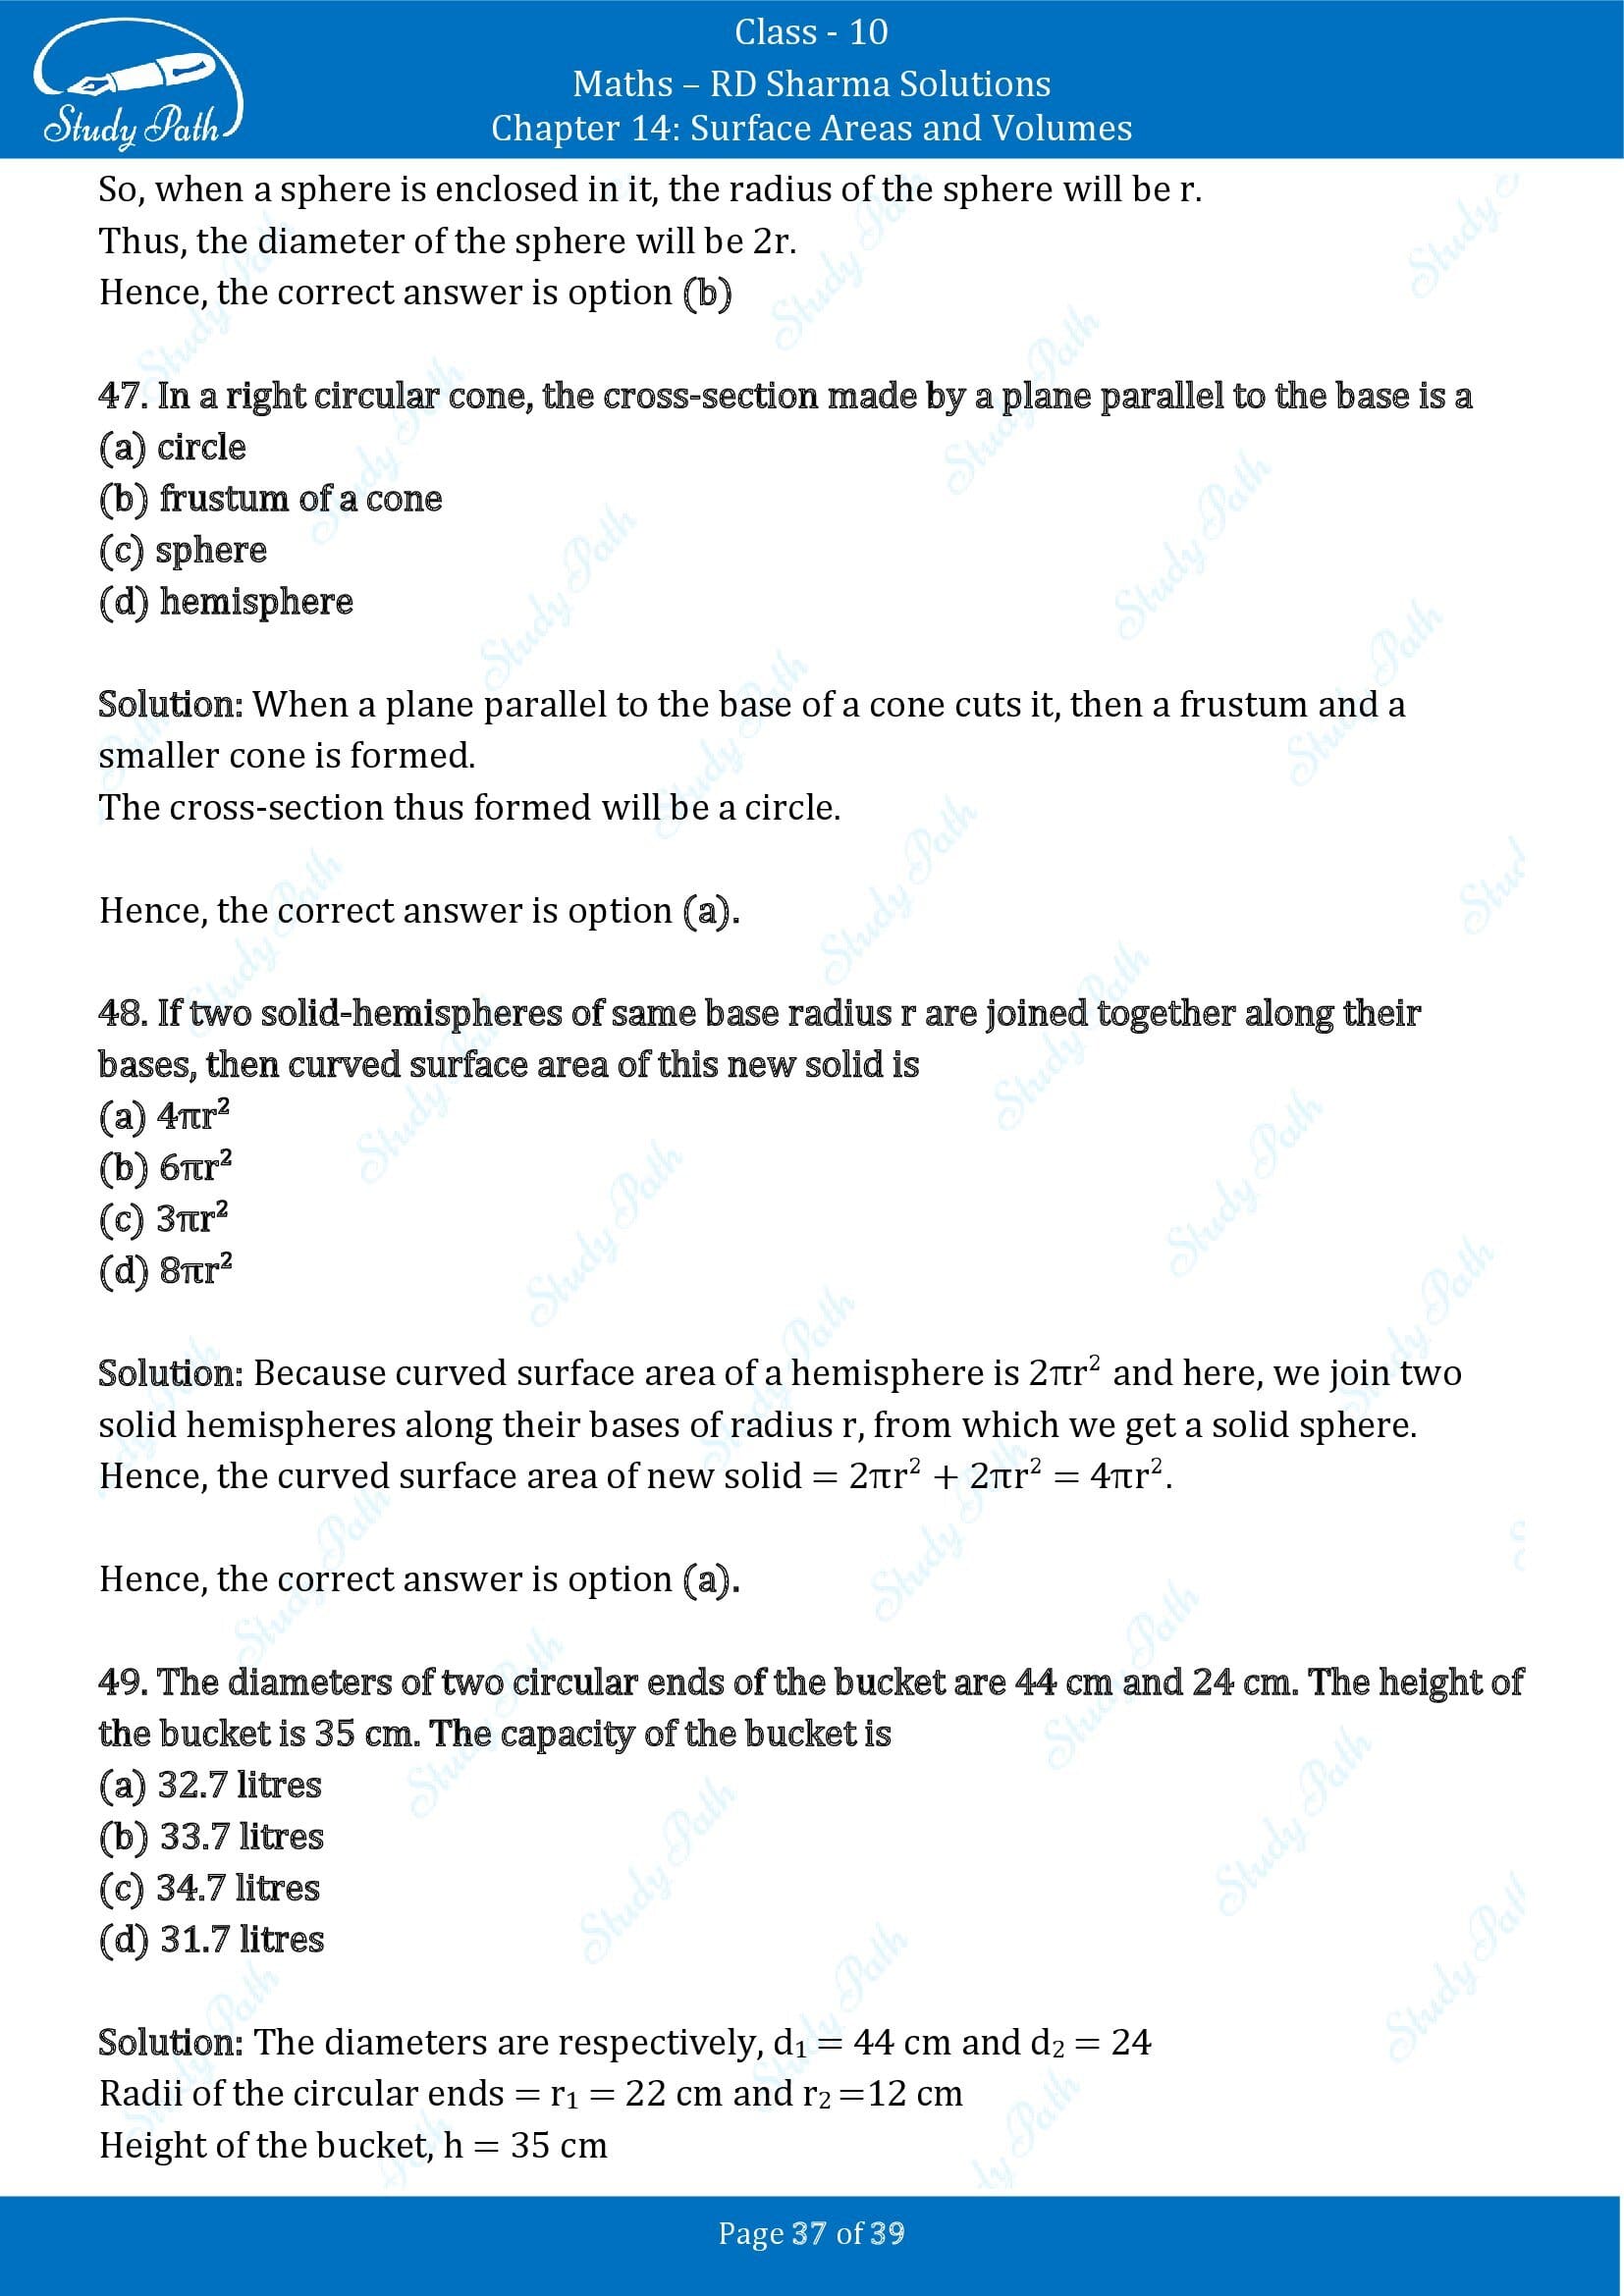 RD Sharma Solutions Class 10 Chapter 14 Surface Areas and Volumes Multiple Choice Question MCQs 00037